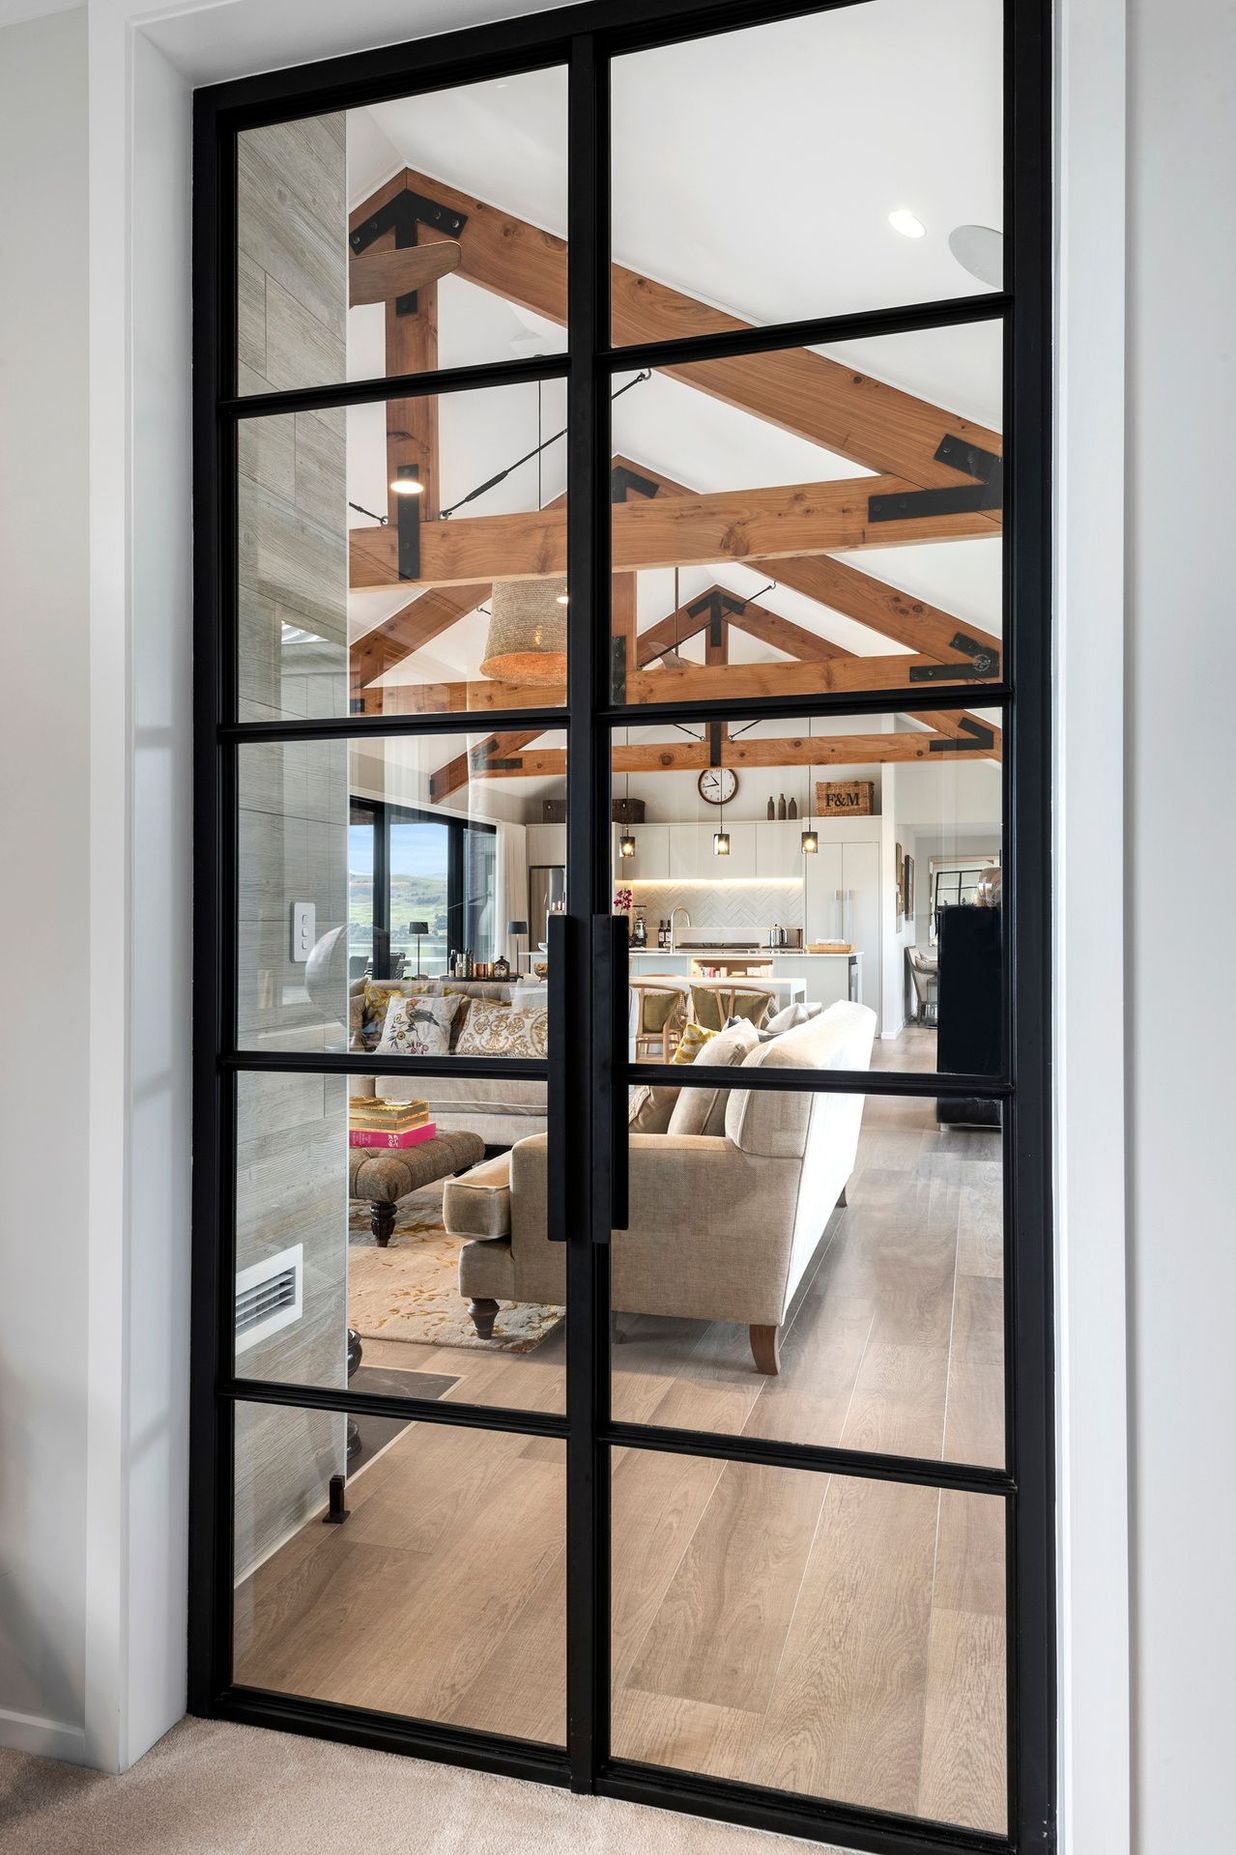 The Crittall door is a stand-out feature in the home, allowing line of sight whilst separating the bedrooms from the living area.